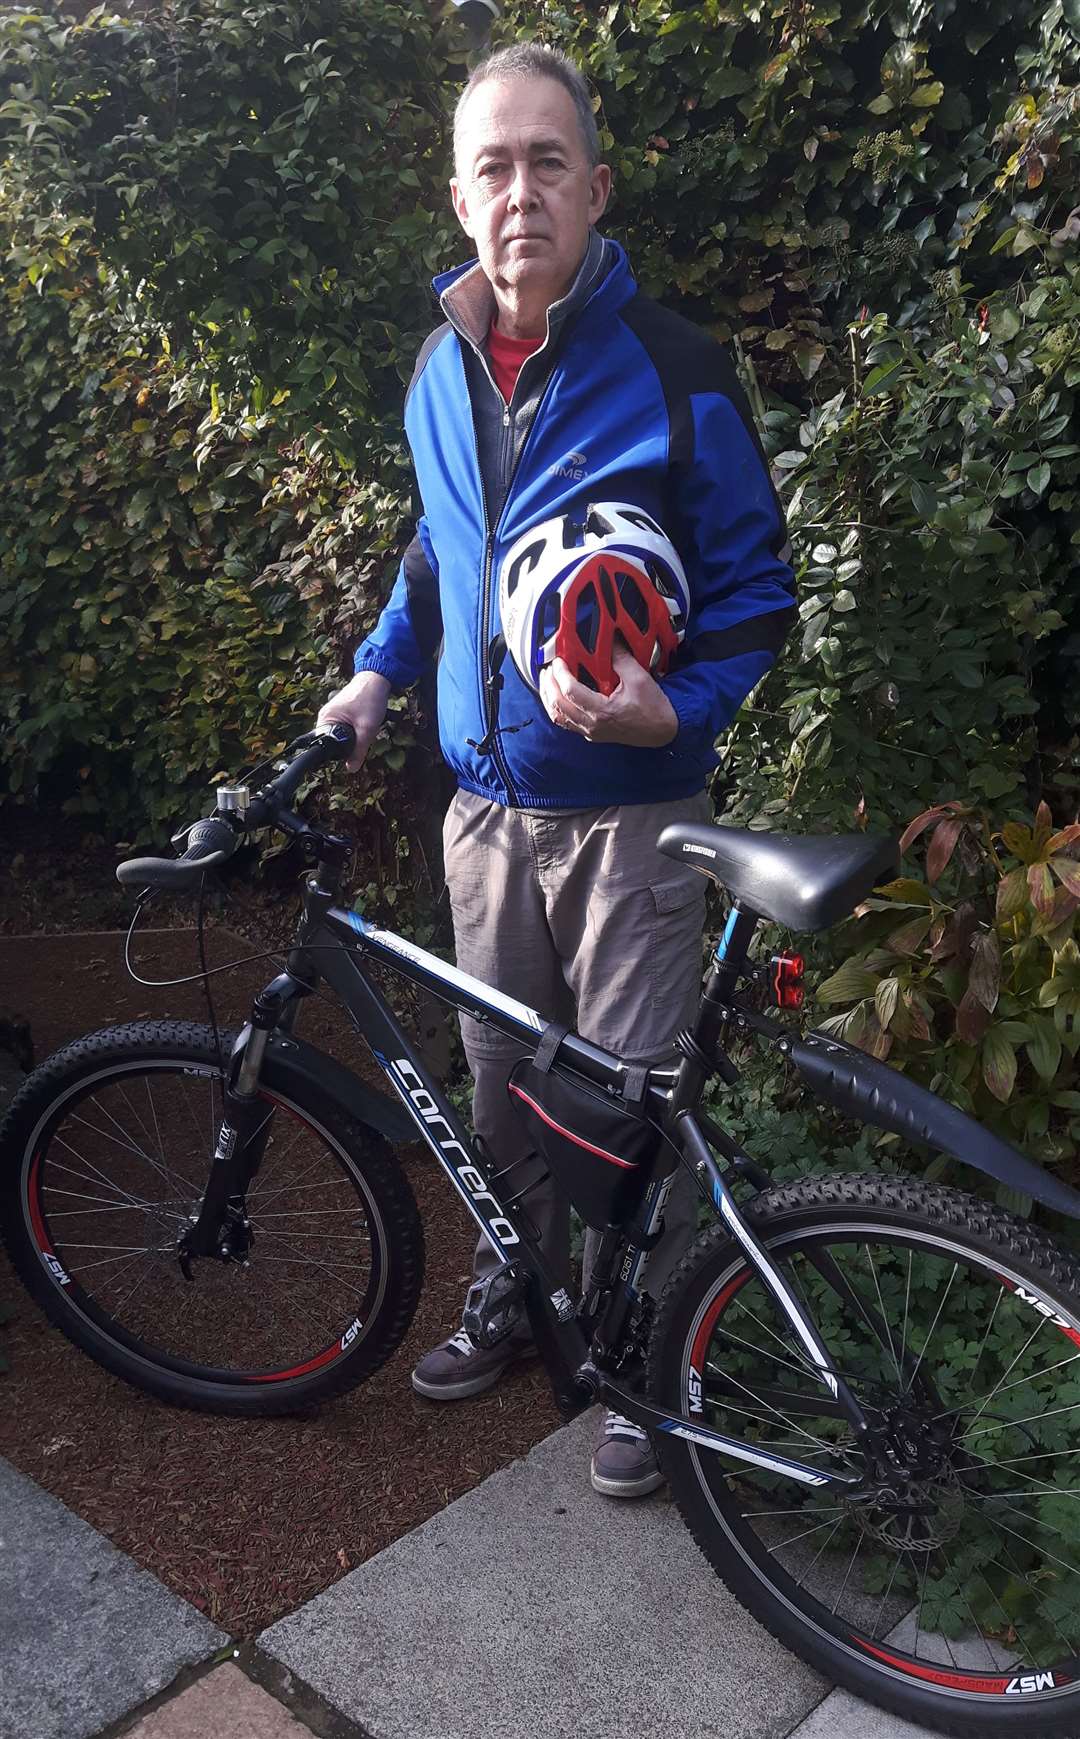 Ian Deal and his bike, wearing the clothes he wore on the day of the accident